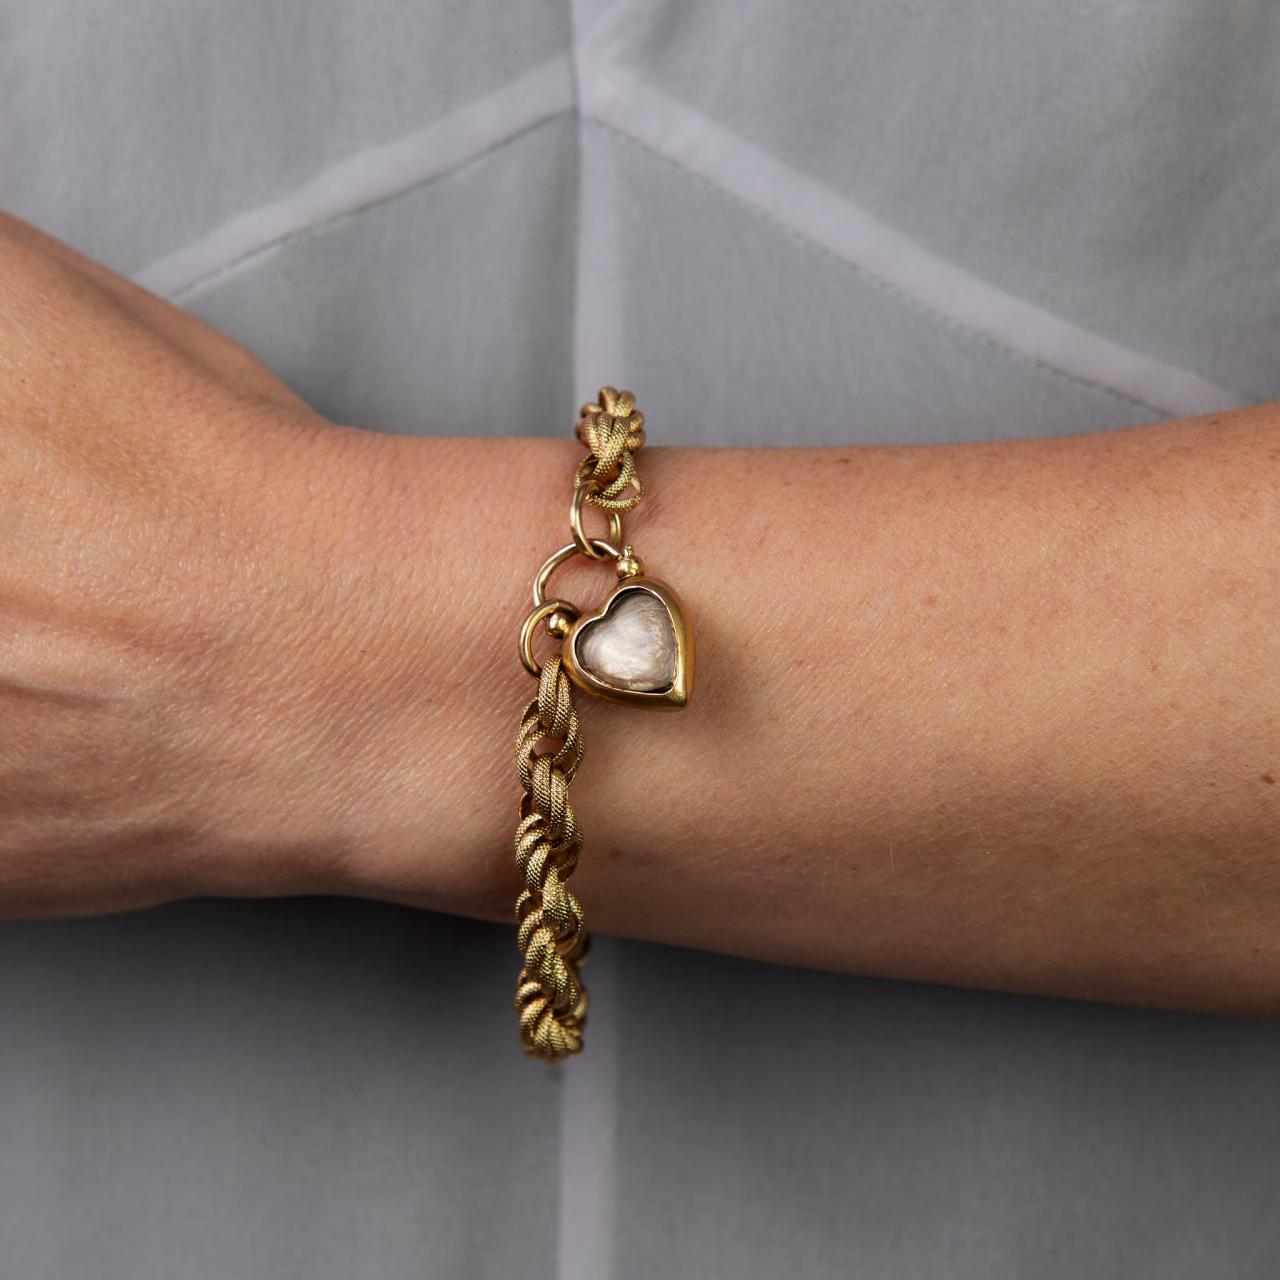 Worked gold fancy link bracelet with forget me not clasp